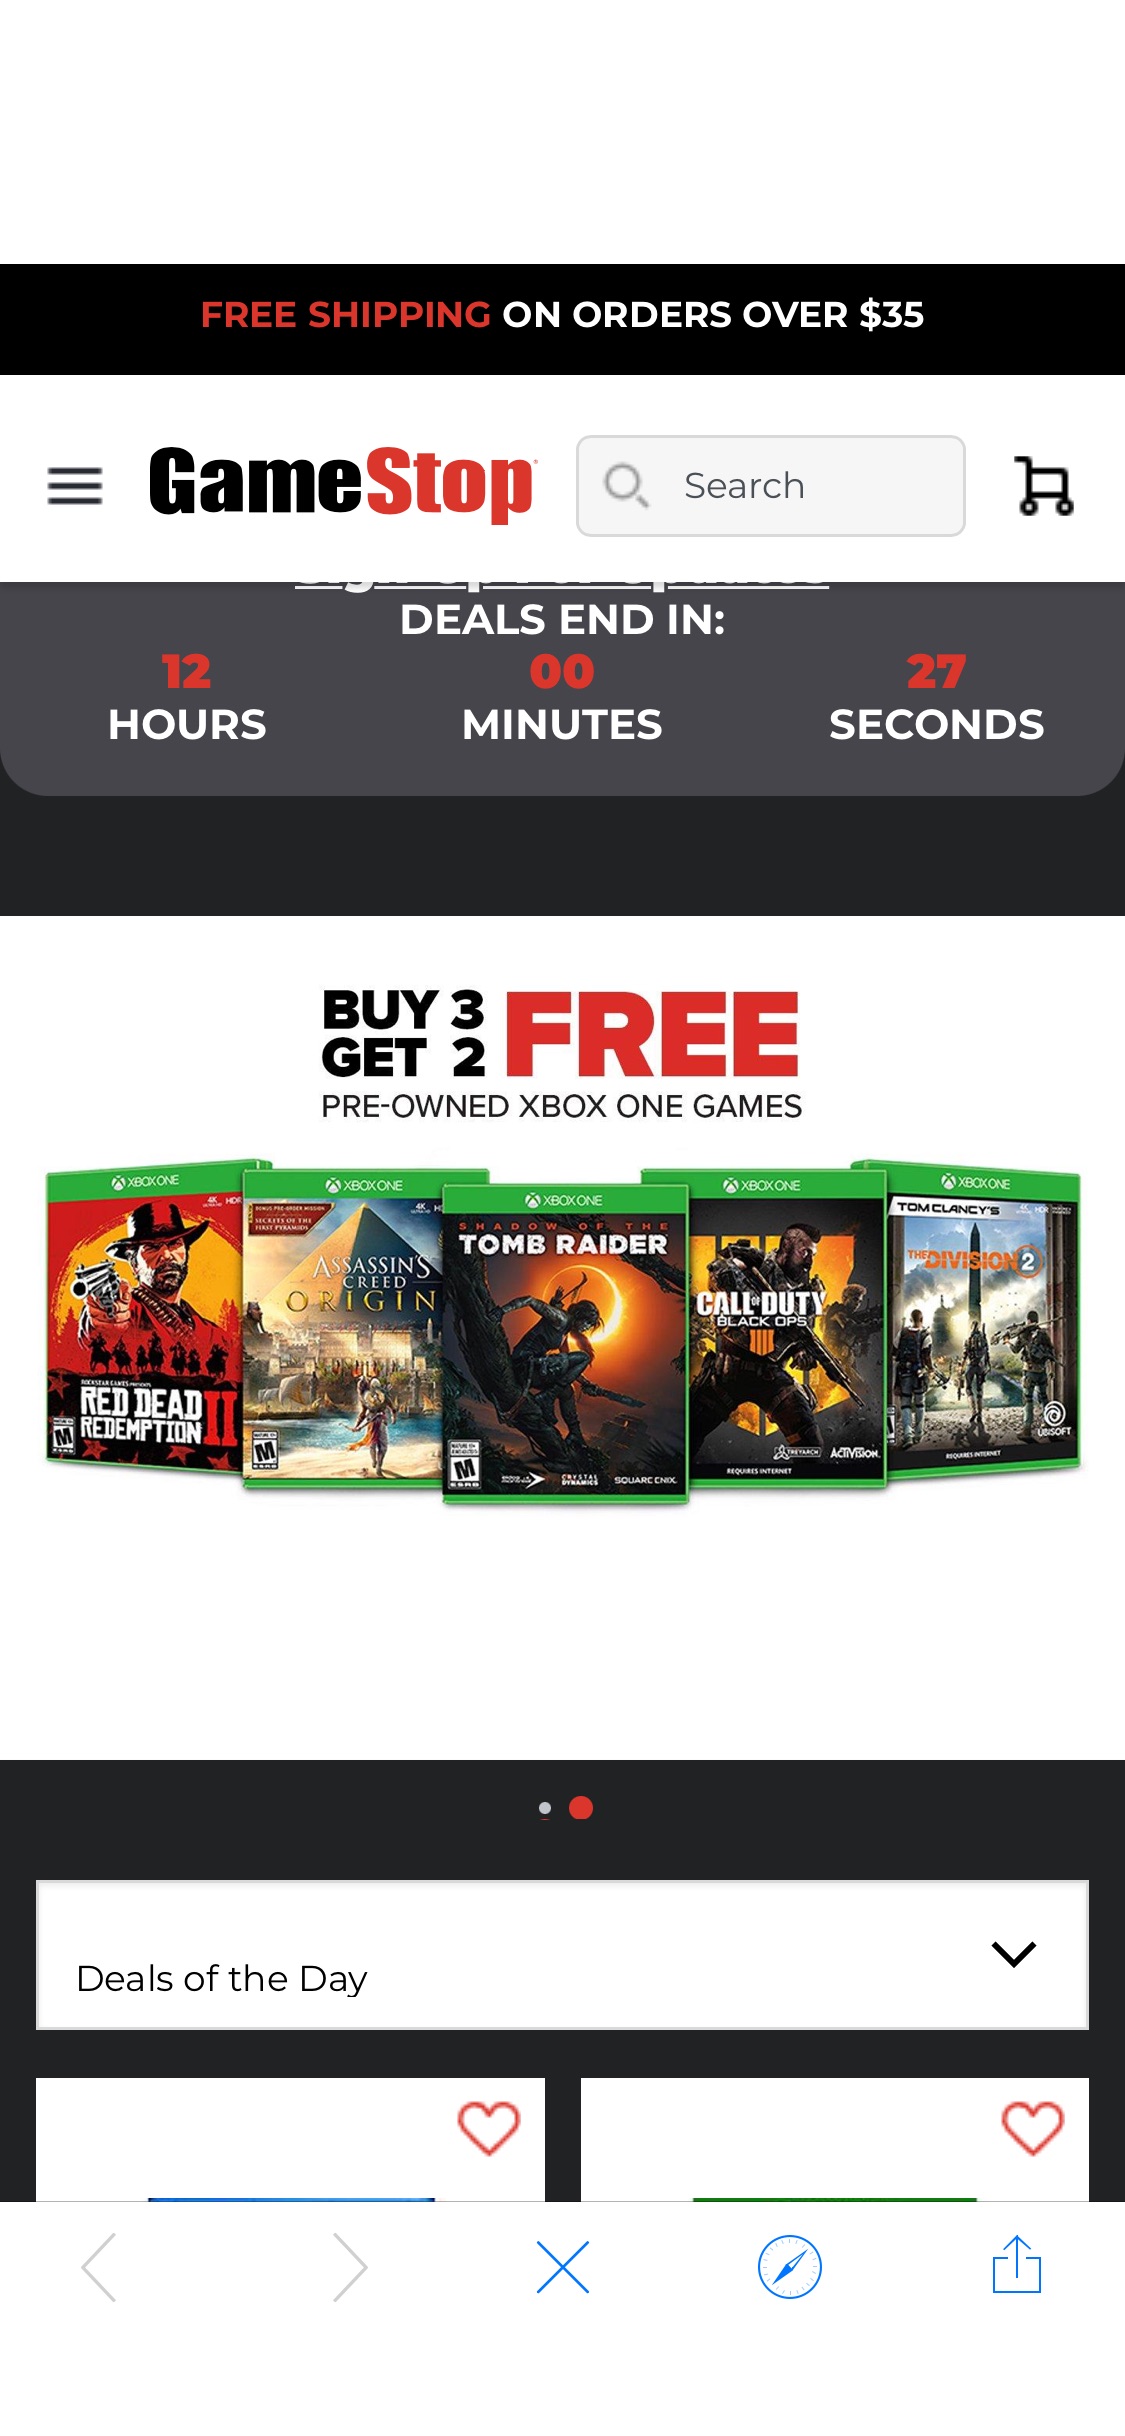 Deal of the Day Deal of the Day | GameStop Gamestop今日优惠，二手游戏光盘买三赠二